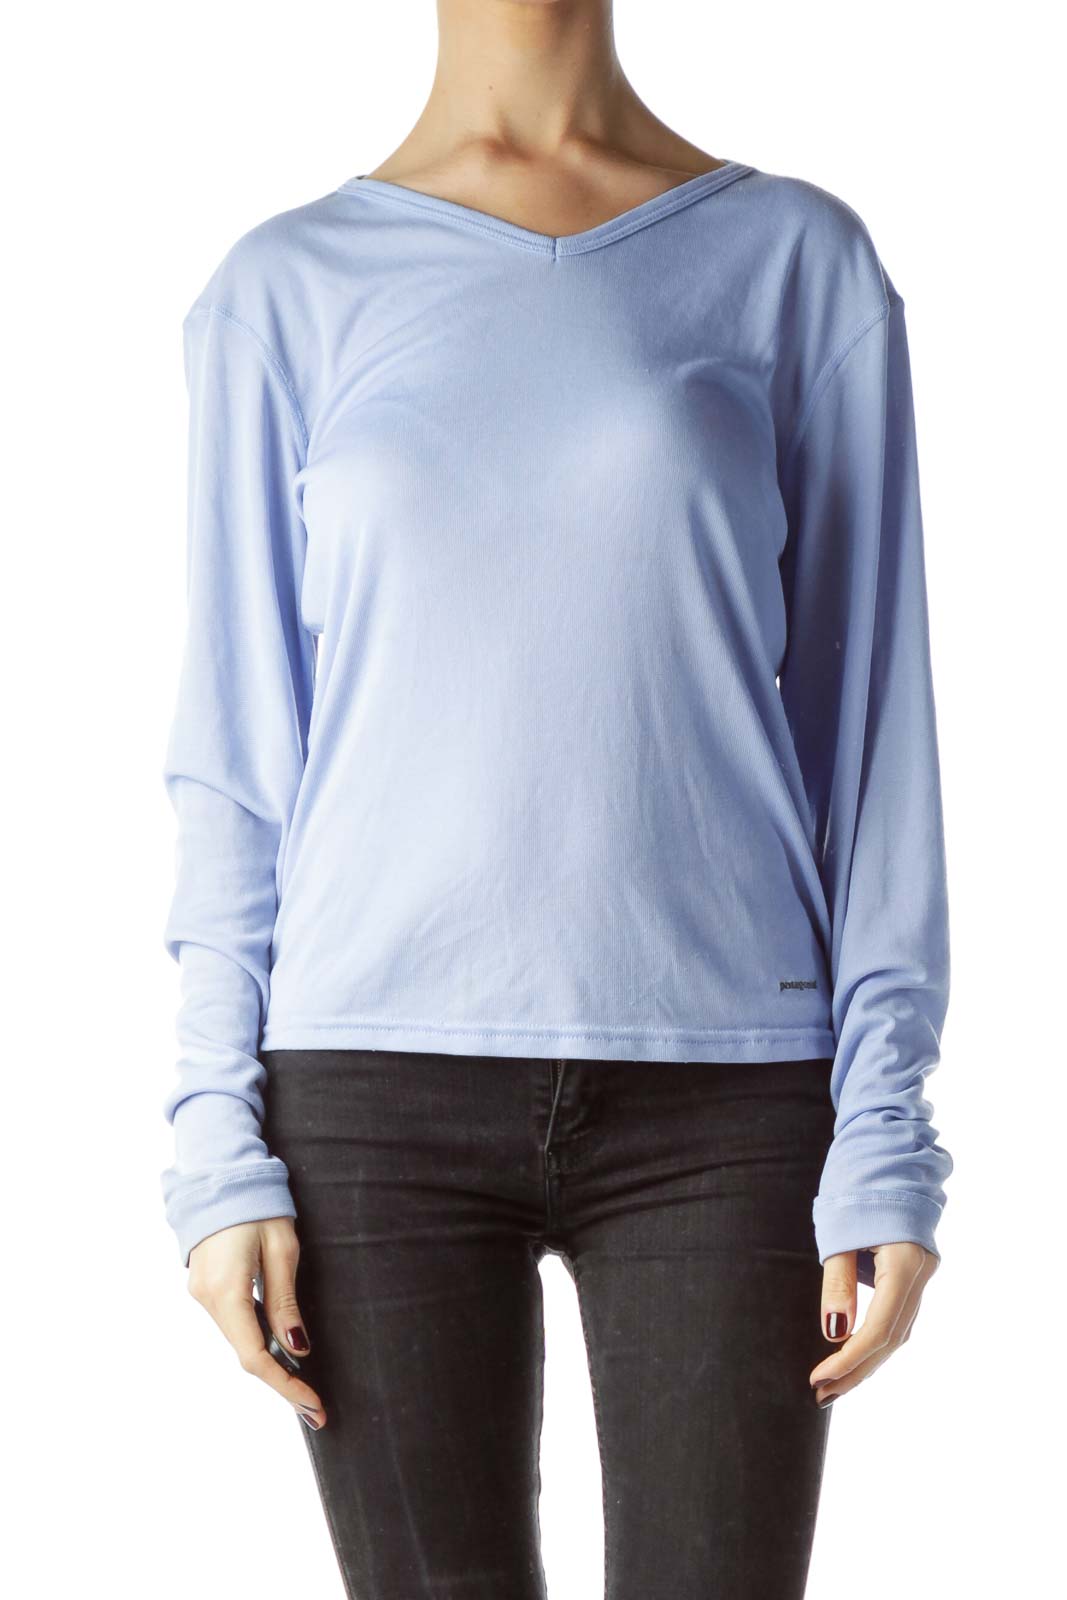 Baby Blue Stretch Long Sleeve Knit Top Front